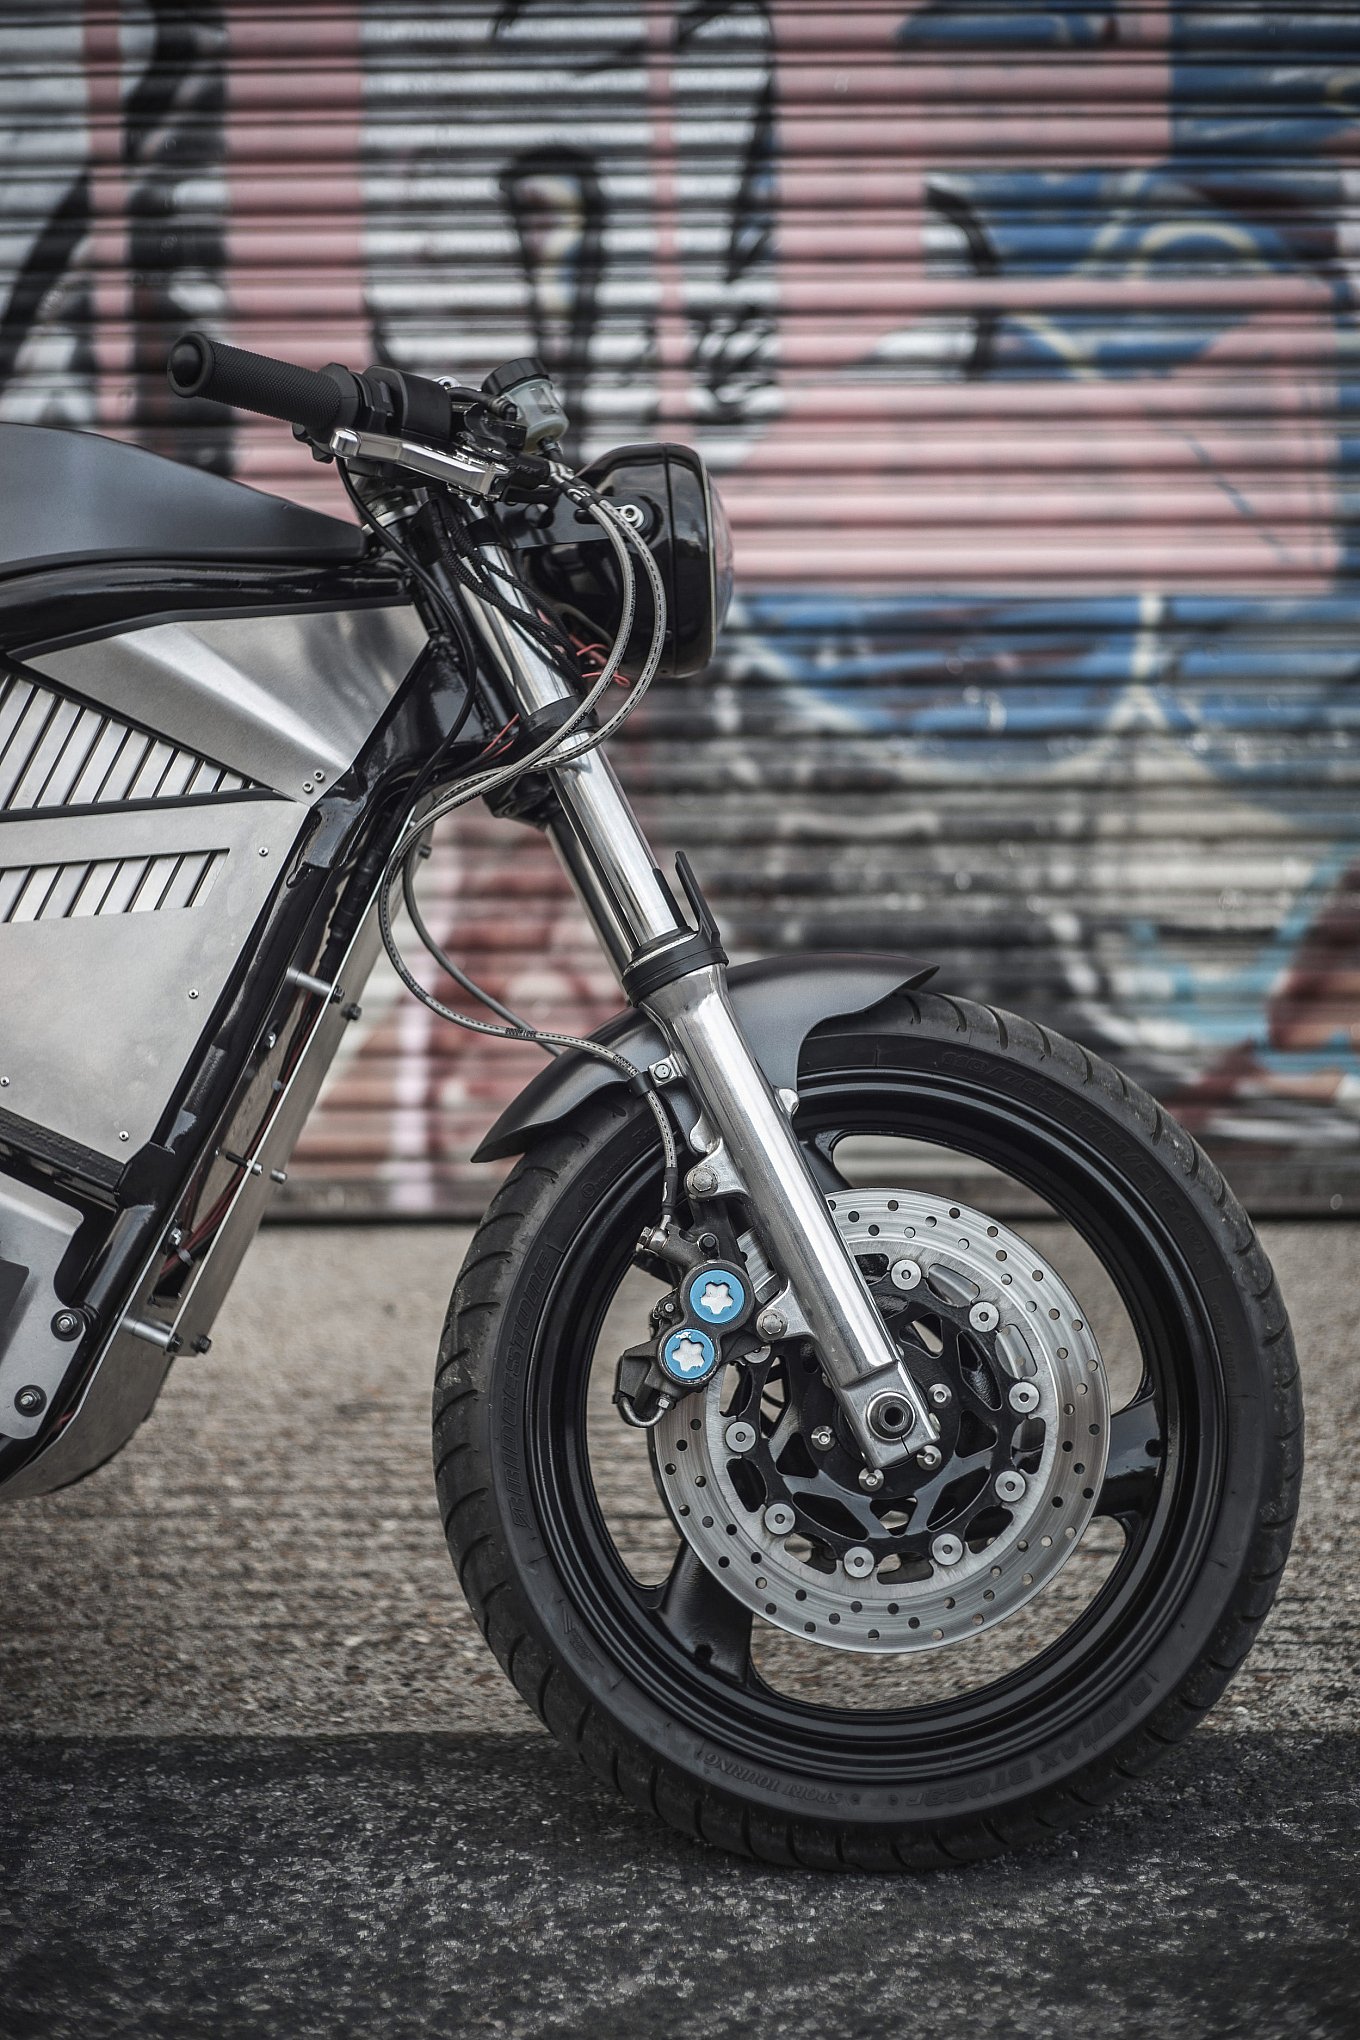 phaser-type-1-electric-motorcycle-by-union-motion-4